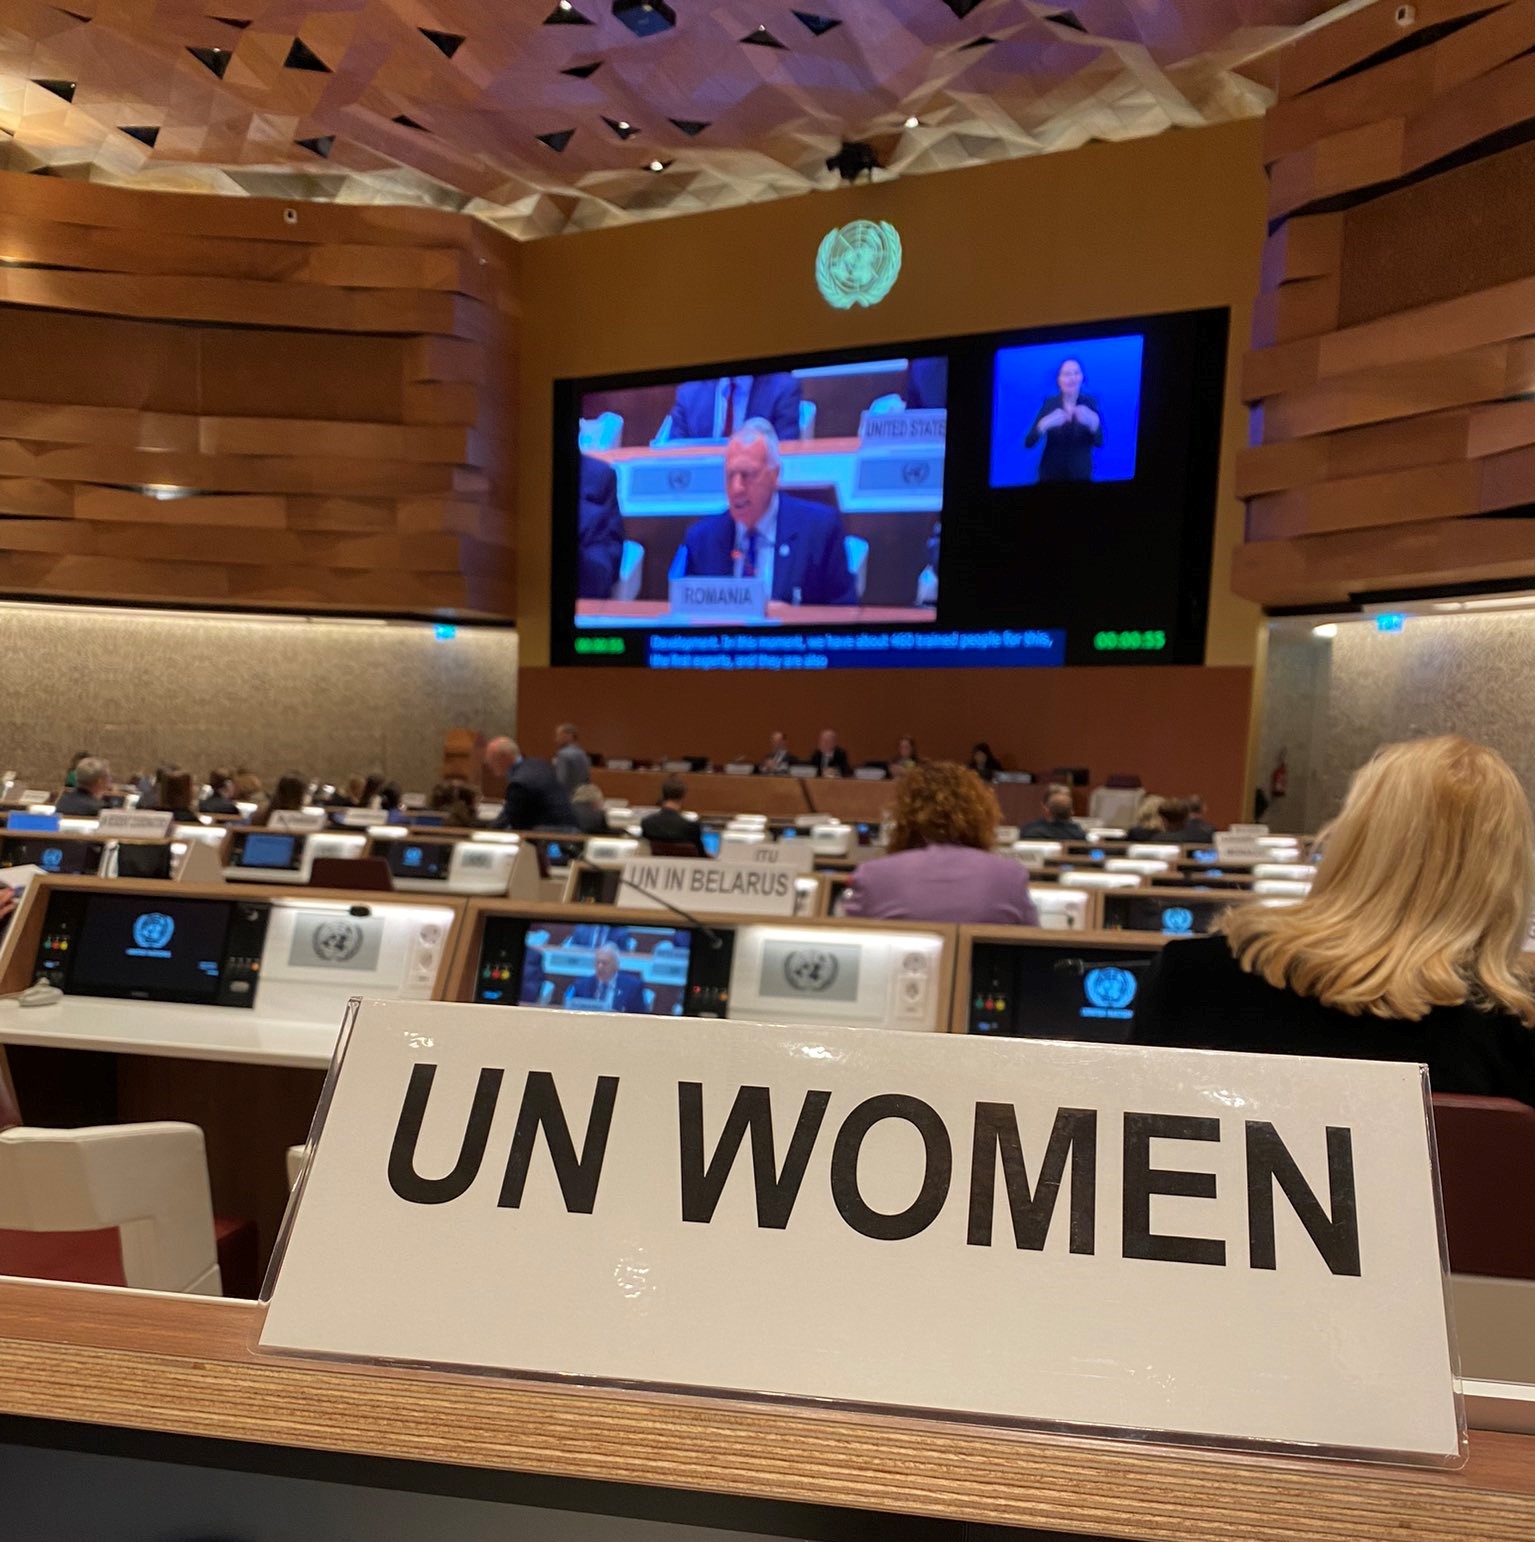 Opening ceremony of the Regional Forum for Sustainable Development at Palais des Nations Conference Centre in Geneva, Switzerland. Photo: UN Women.